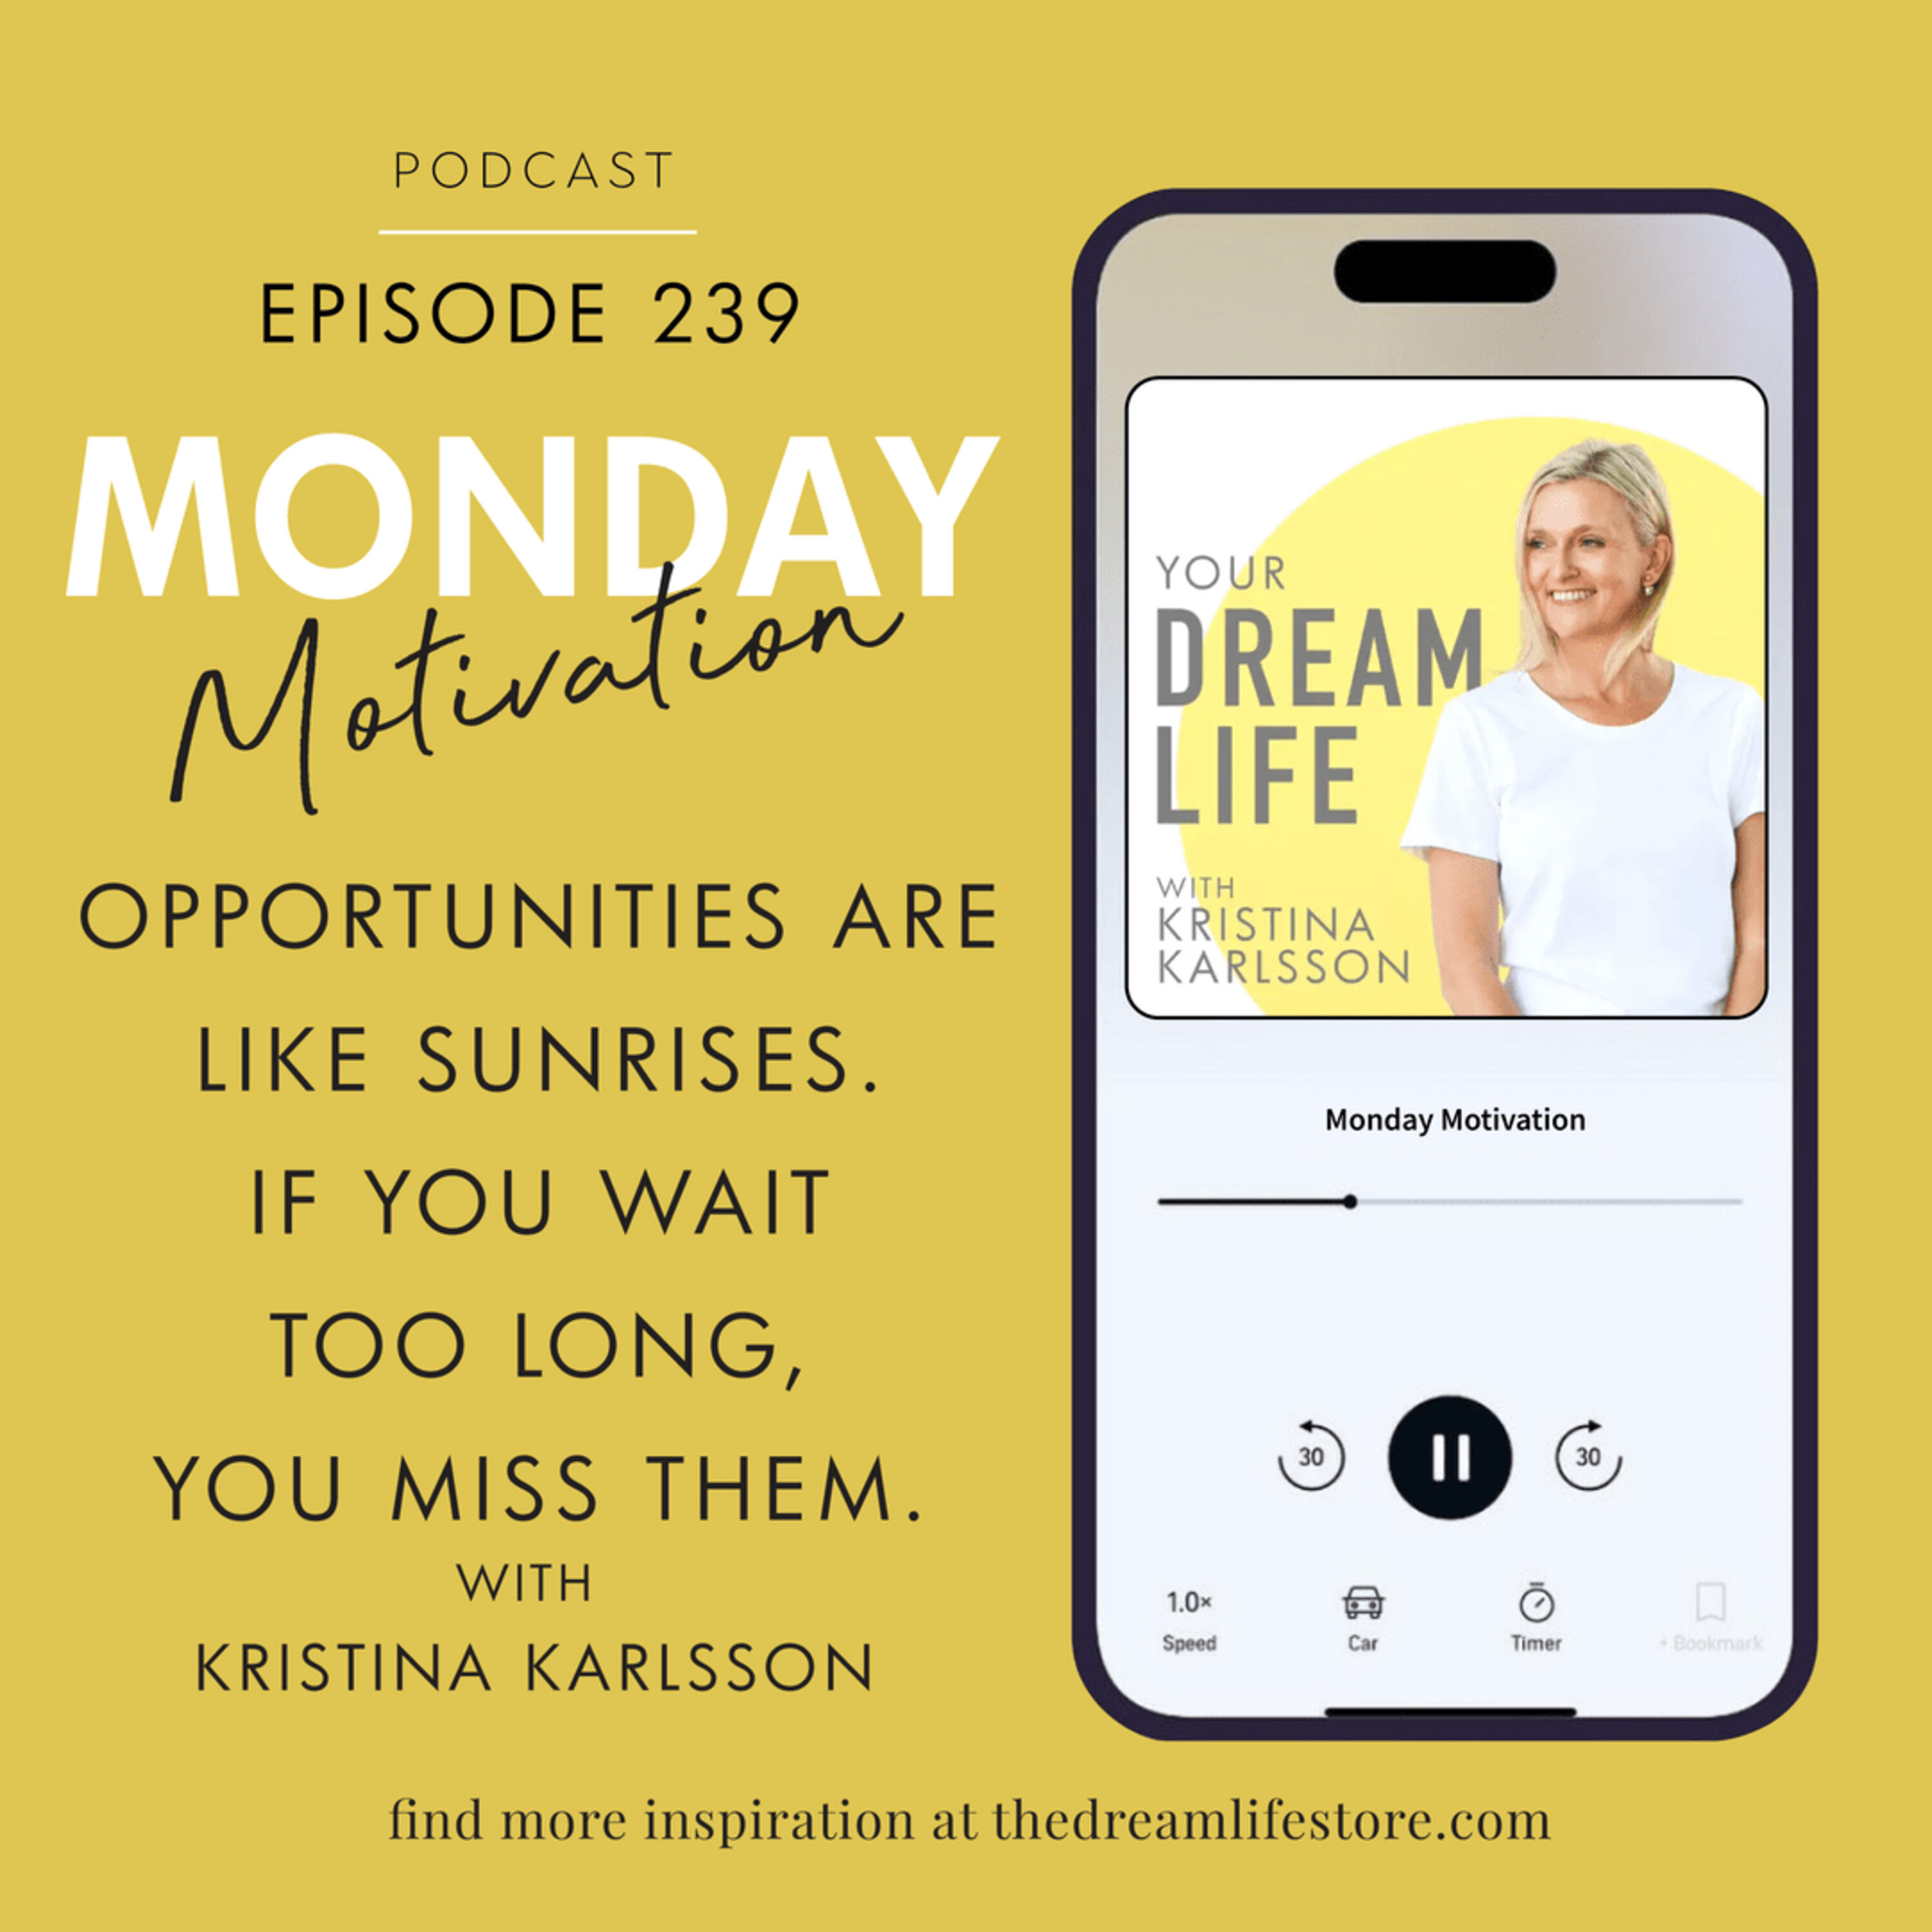 #239 - Monday Motivation: 'Opportunities are like sunrises. If you wait too long, you miss them"